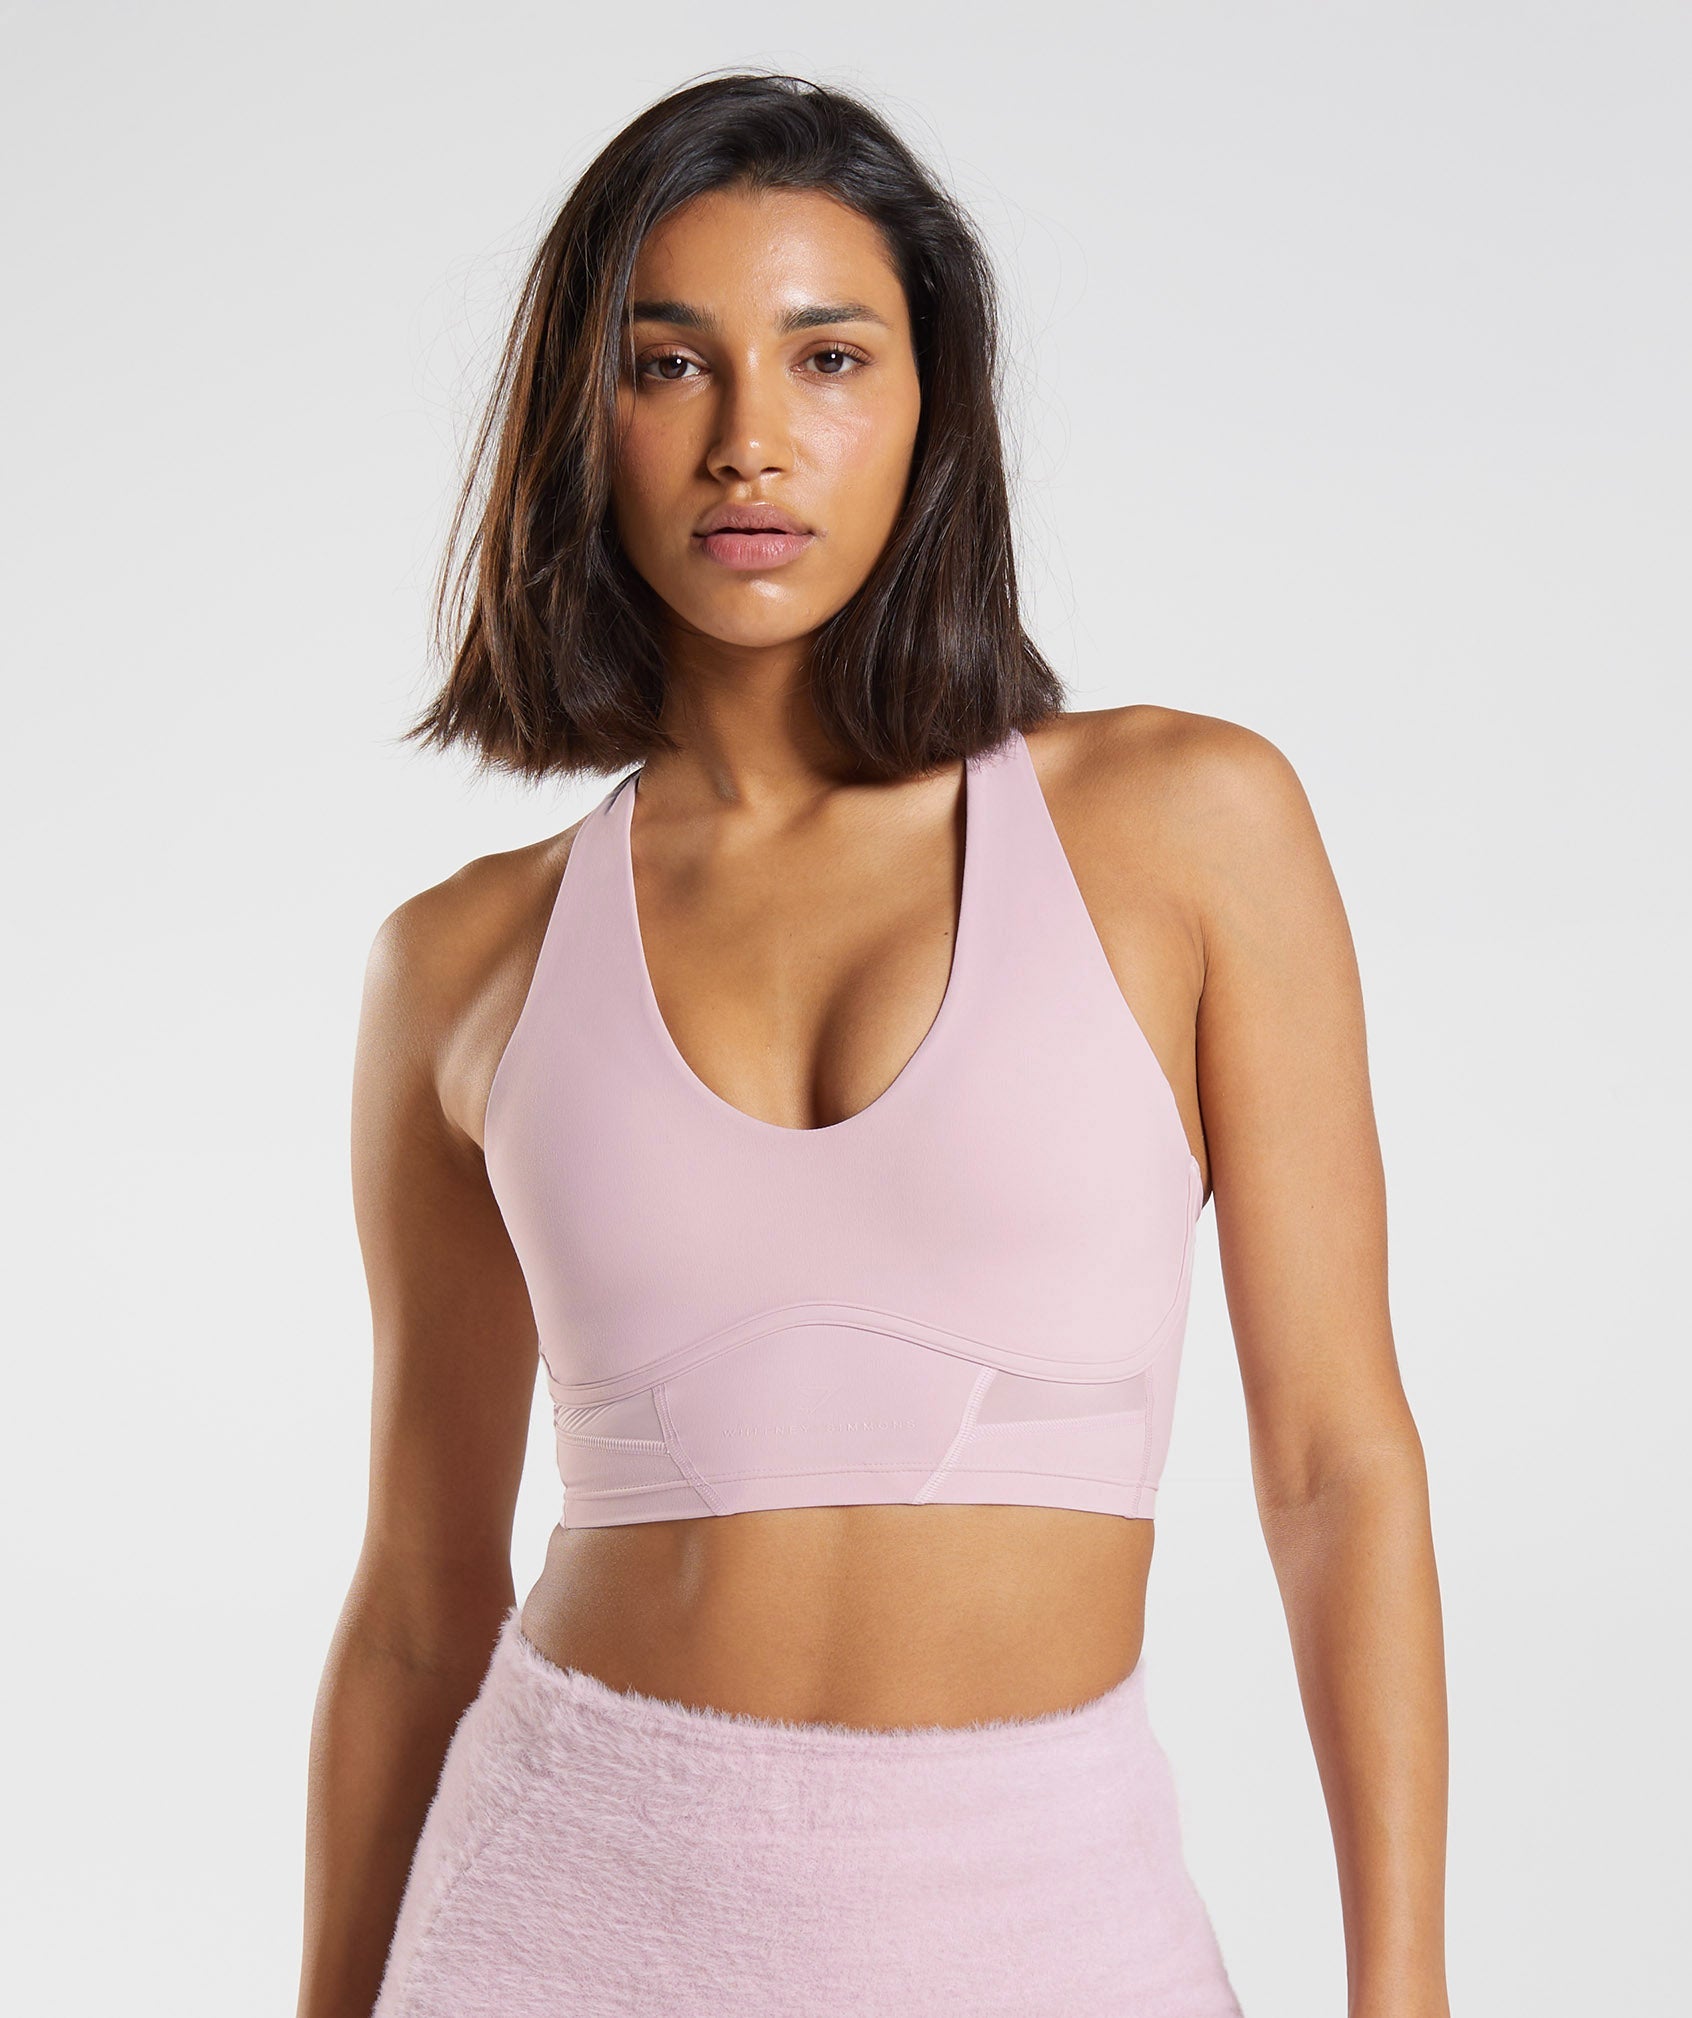 Gymshark launches latest accessory in collaboration with Whitney